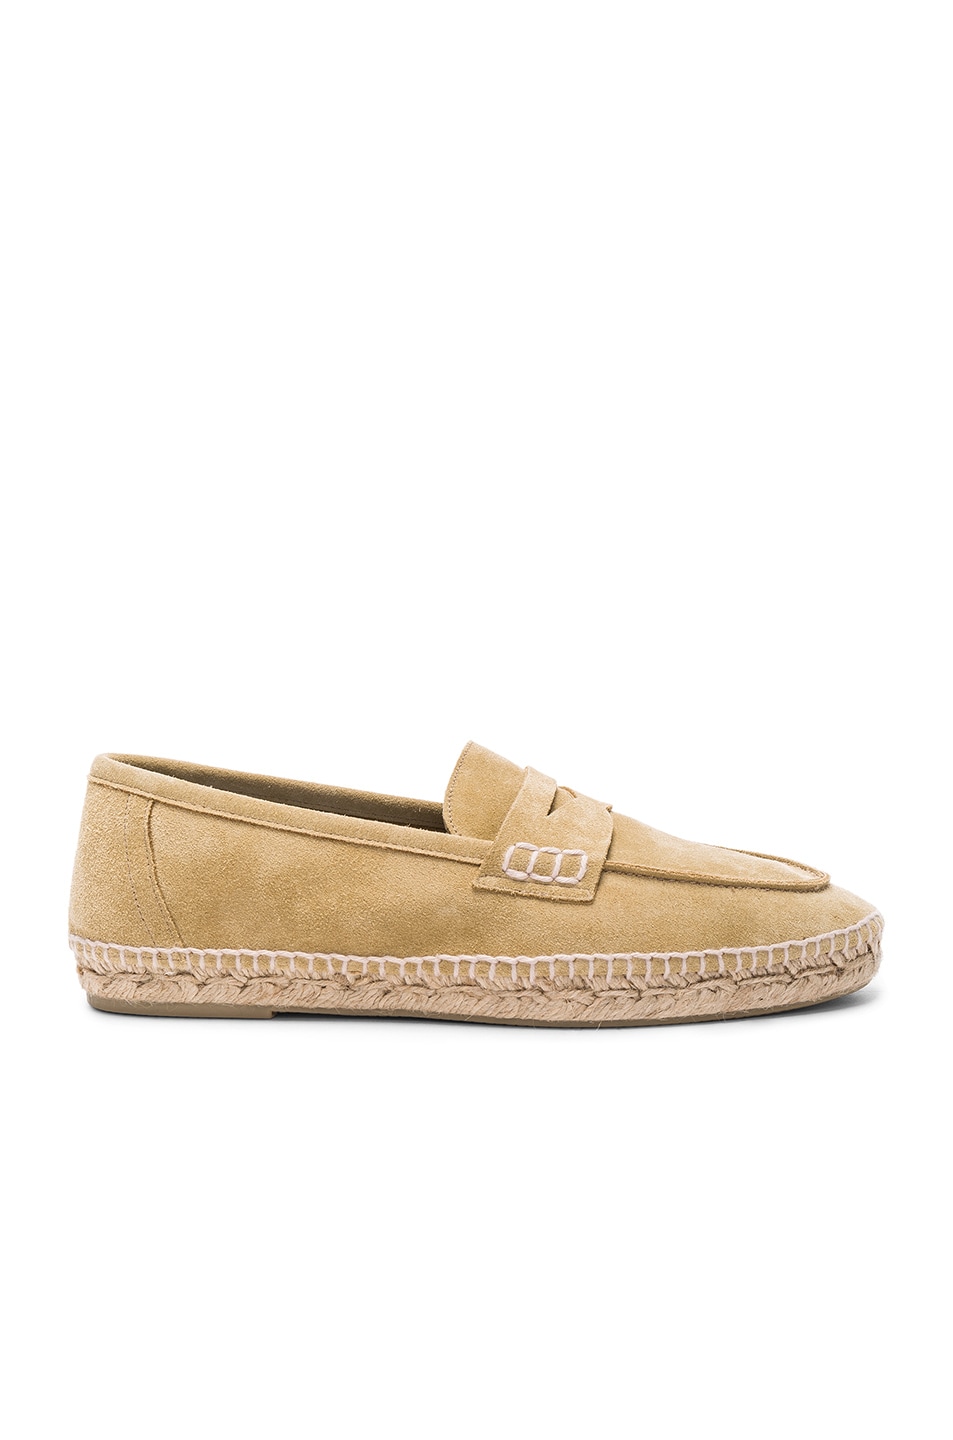 7 Stores In Stock: LOEWE Suede Espadrille Penny Loafers, Gold | ModeSens